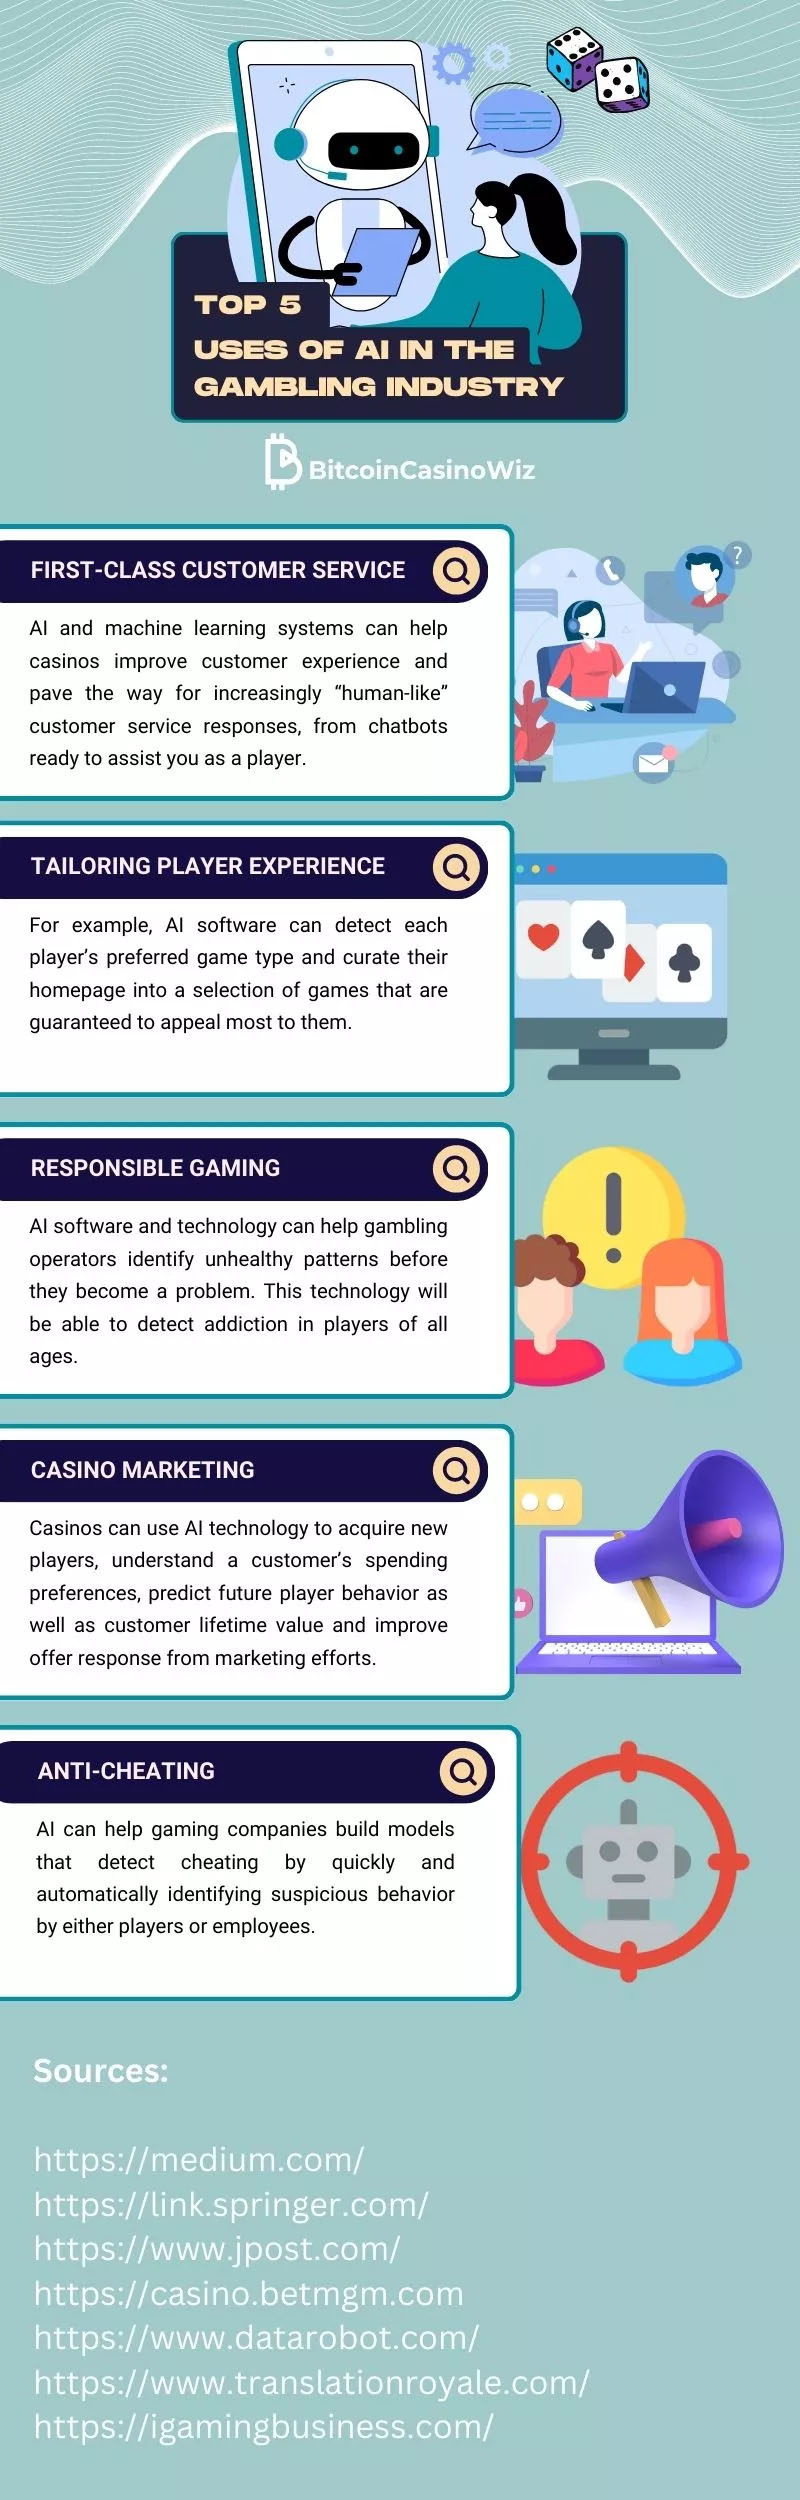 Top 5 Uses of AI in the Gambling Industry